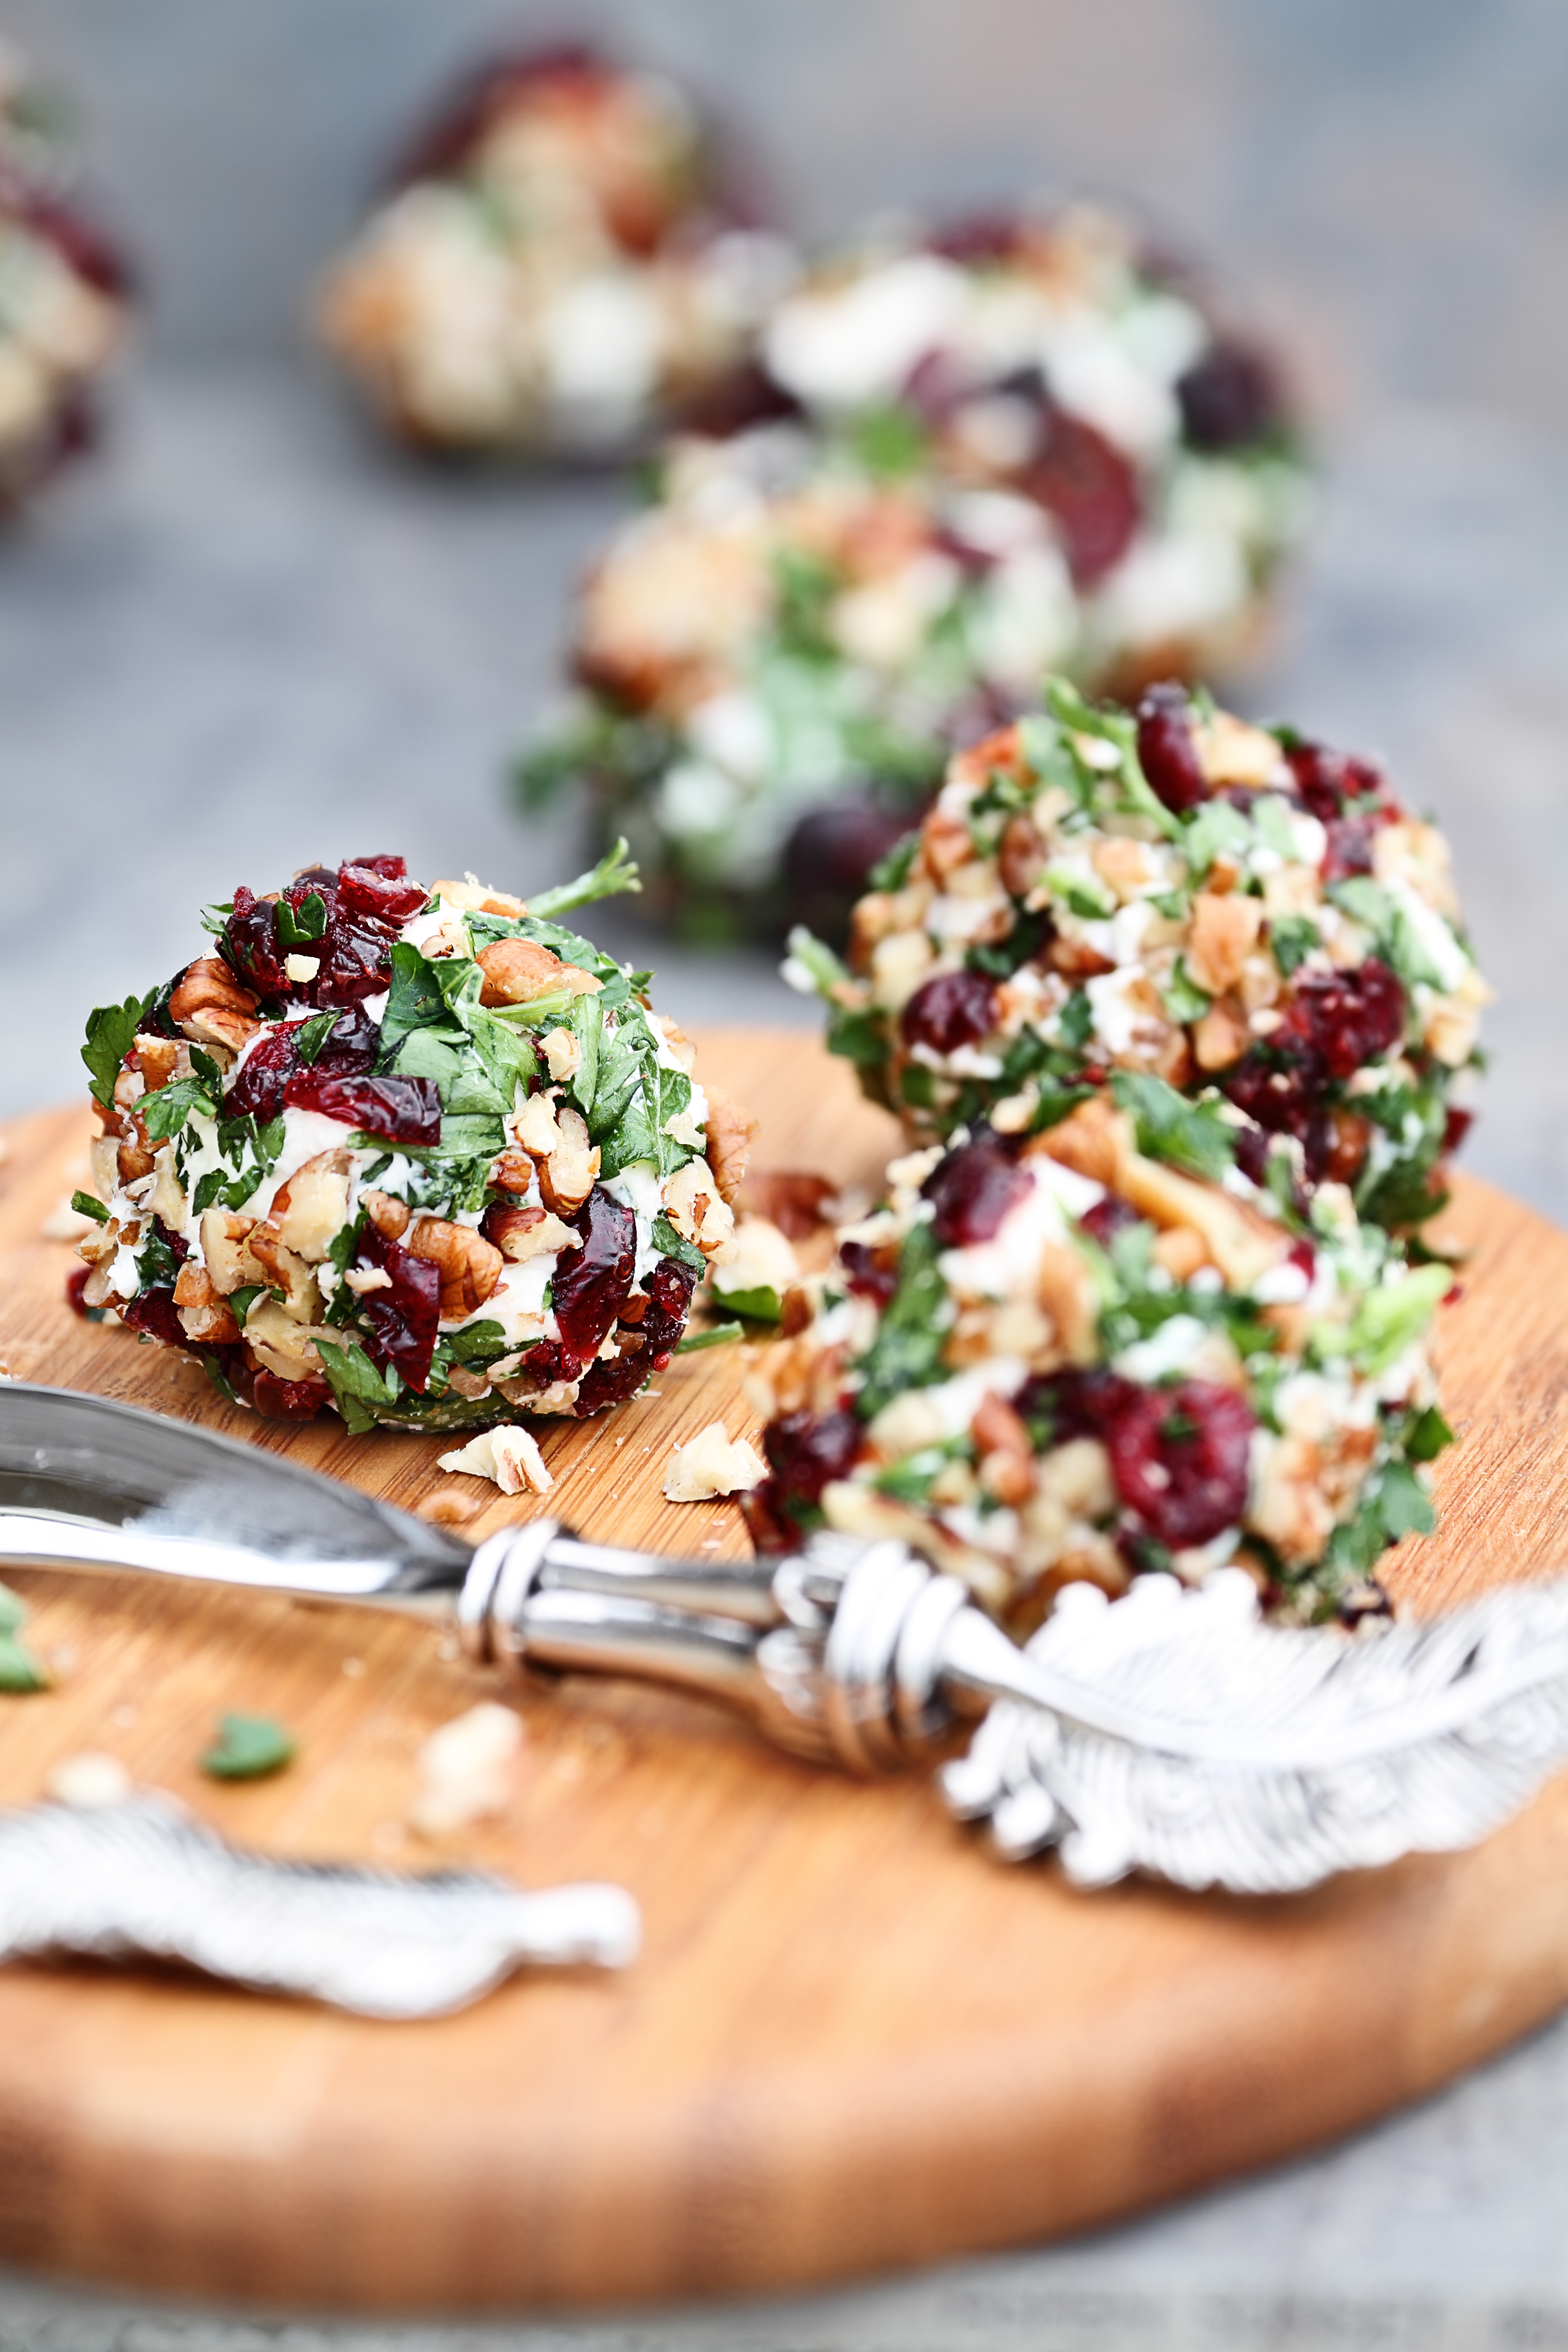 Cranberry nut cheeseball made with cream cheese, goat or feta cheese, parsley, cranberries and chopped pecans over a rustic background. Extreme shallow depth of field with selective focus on center cutting board.